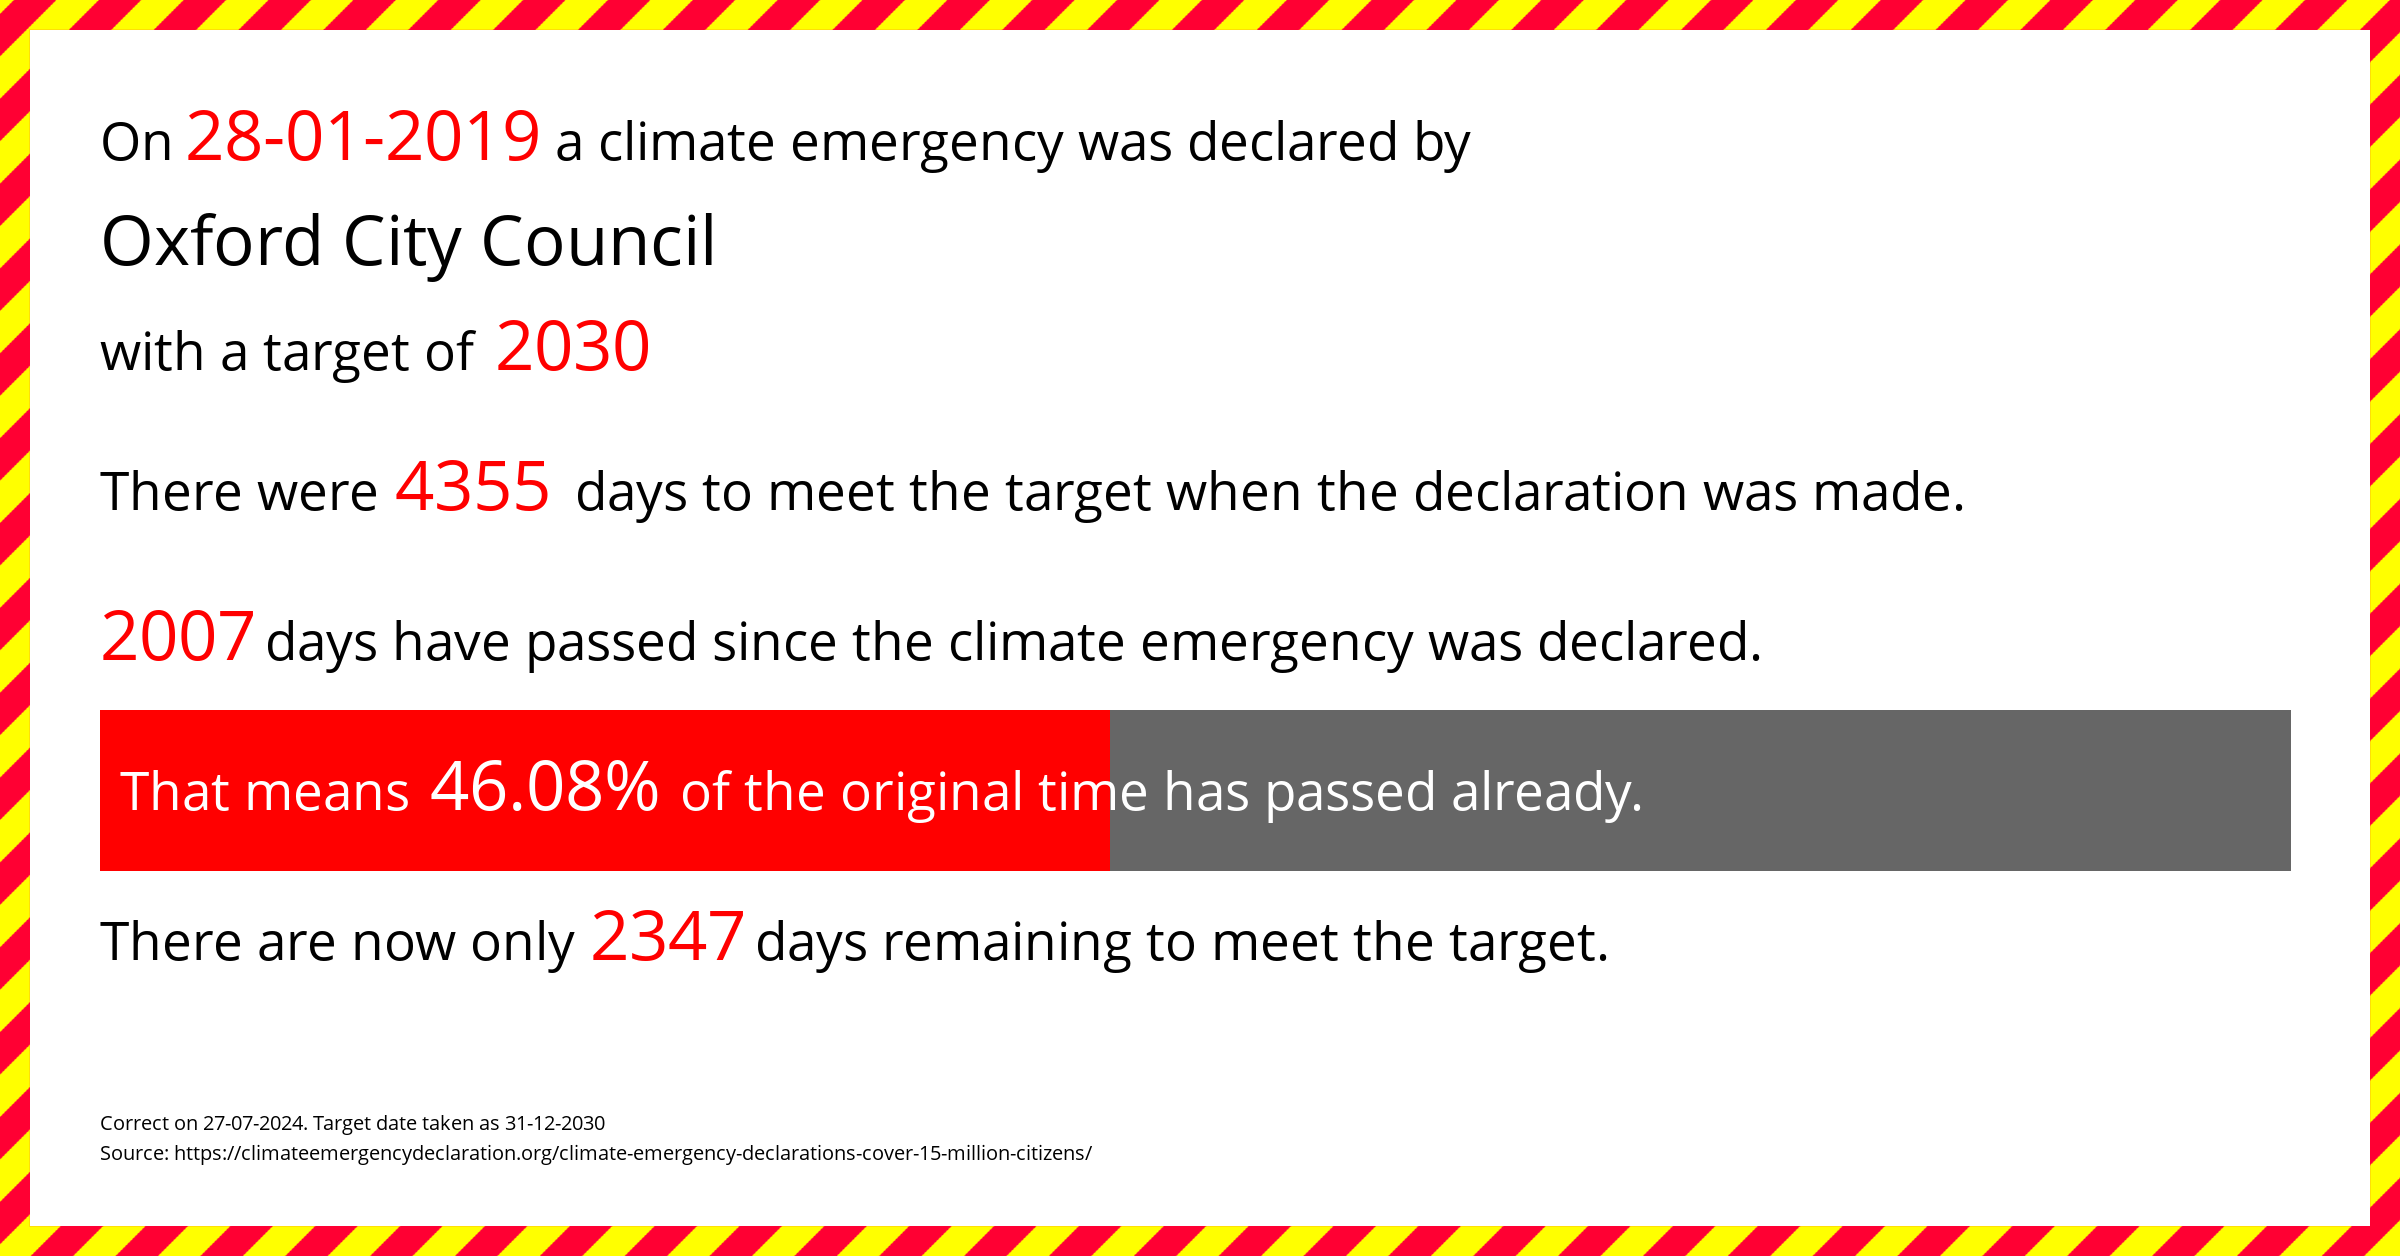 Oxford City Council declared a Climate emergency on Monday 28th January 2019, with a target of 2030.